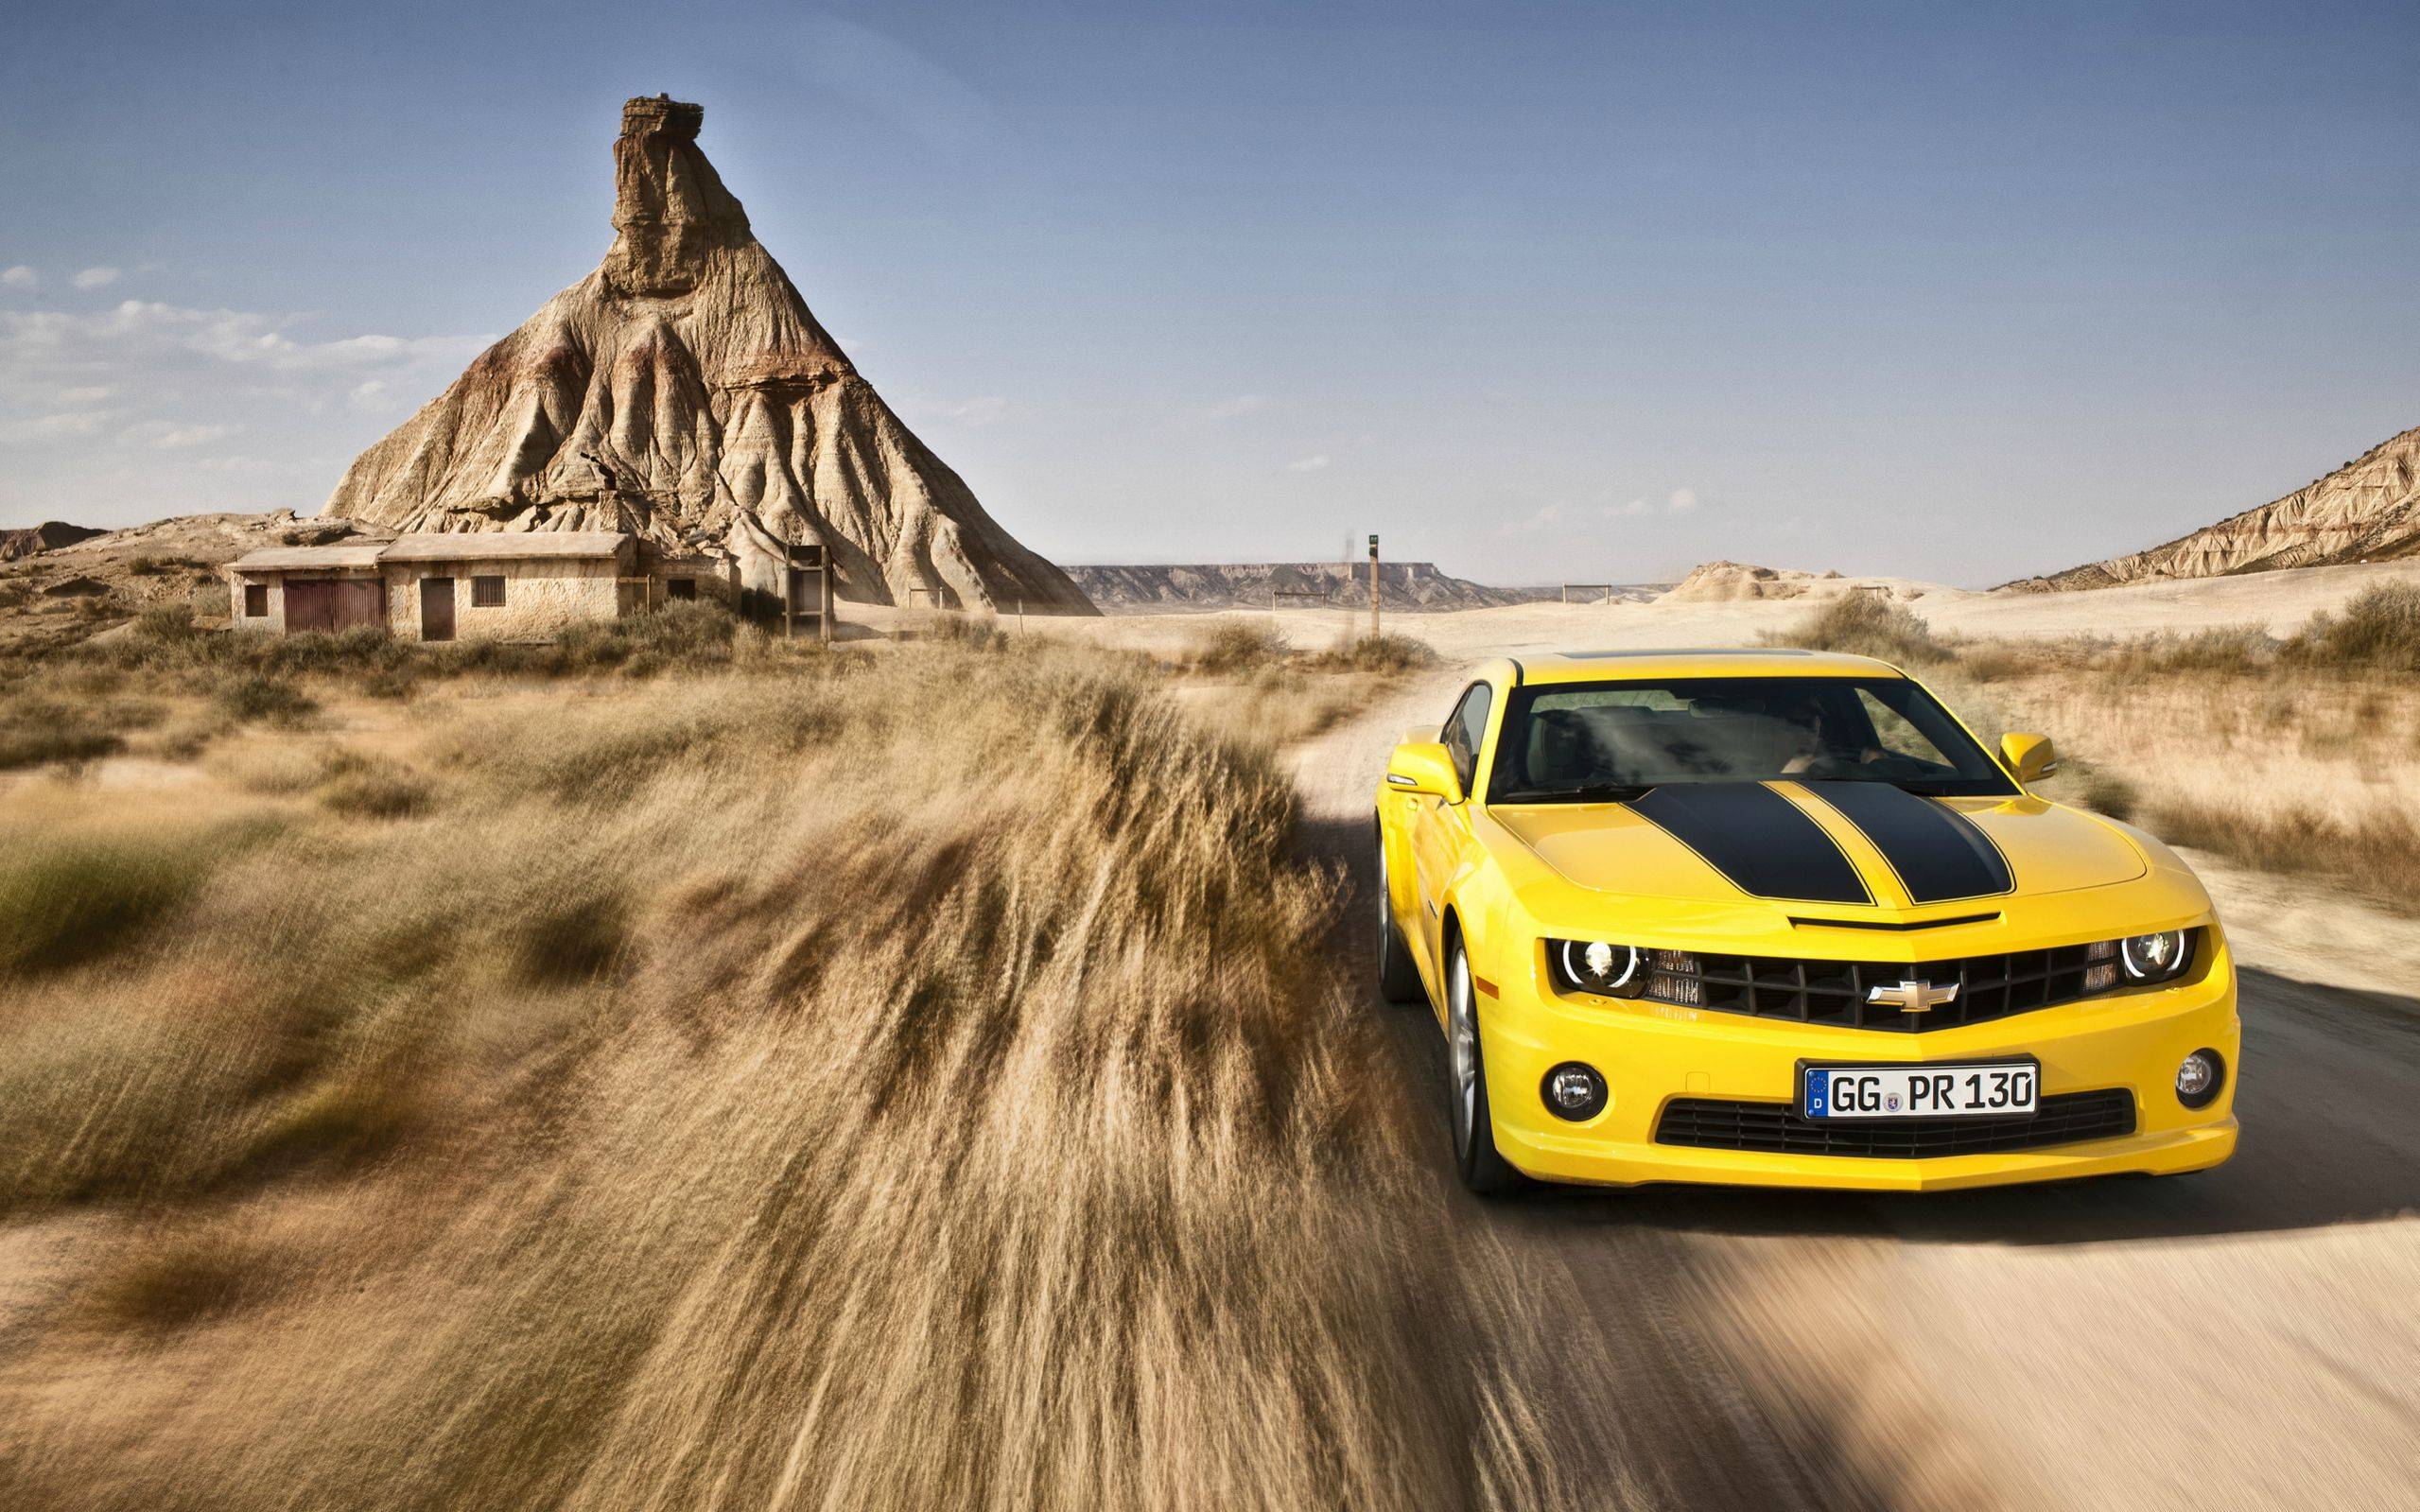 Widescreen Ford Mustang Desert Road American Car With Cars Wallpaper